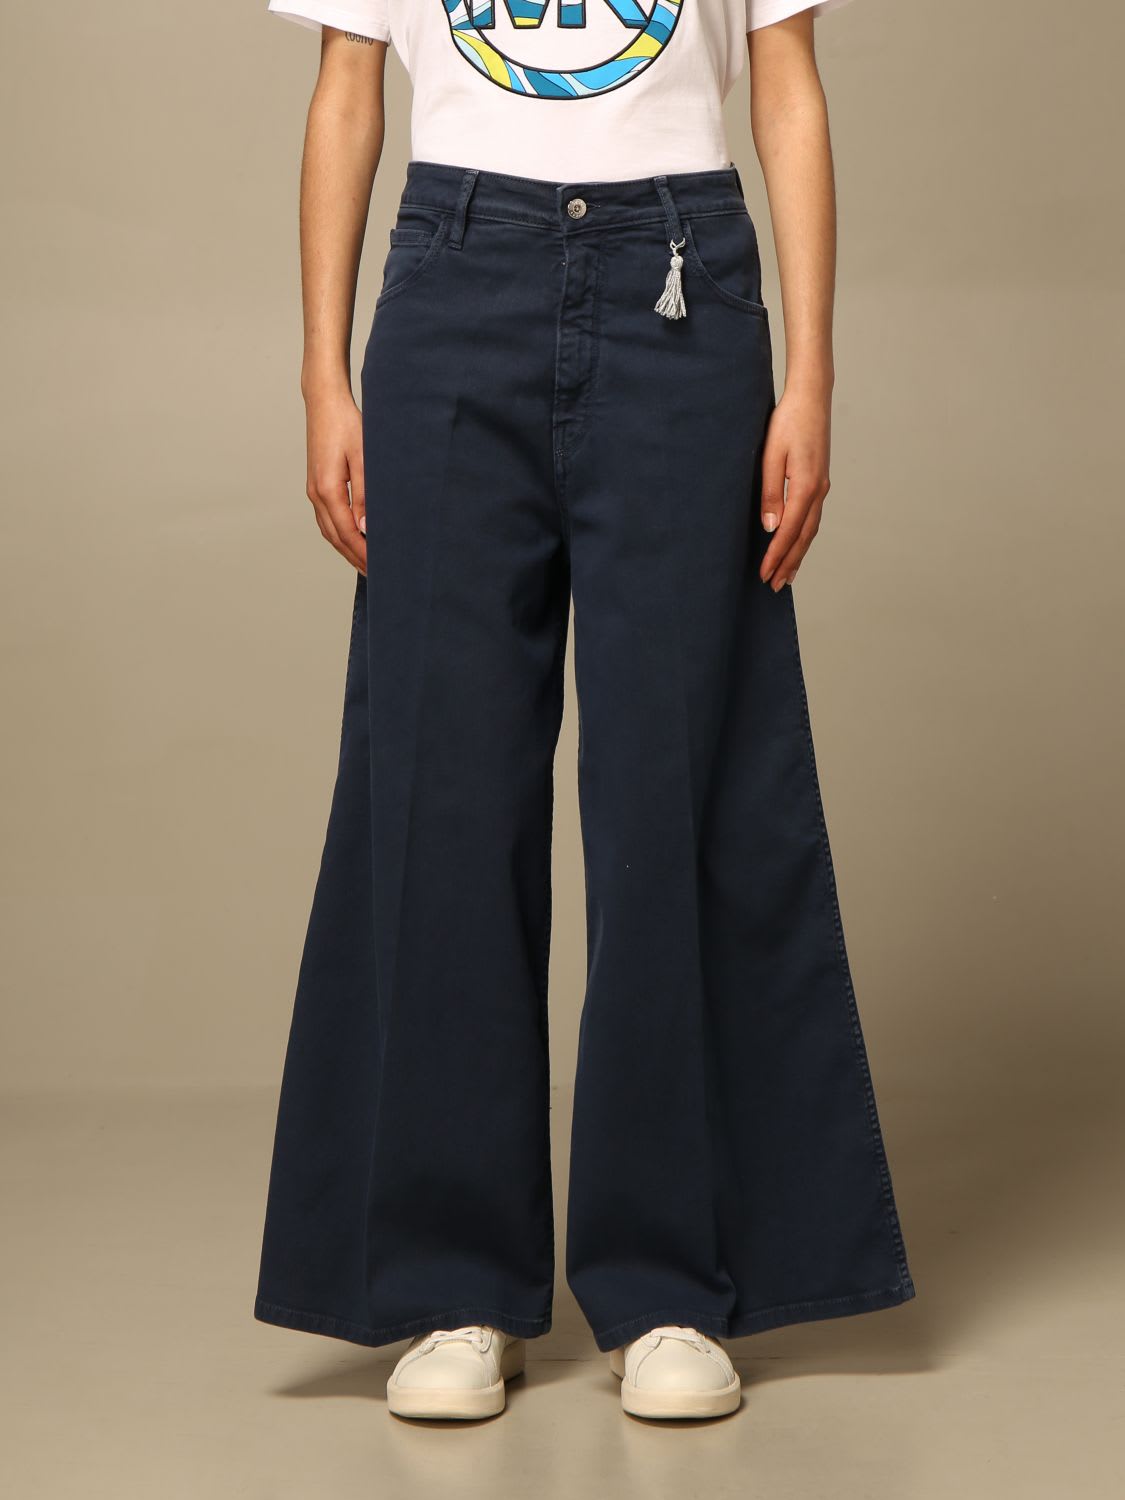 CYCLE PANTS WIDE HIGH-WAISTED CYCLE PANTS,P531251 T031 07